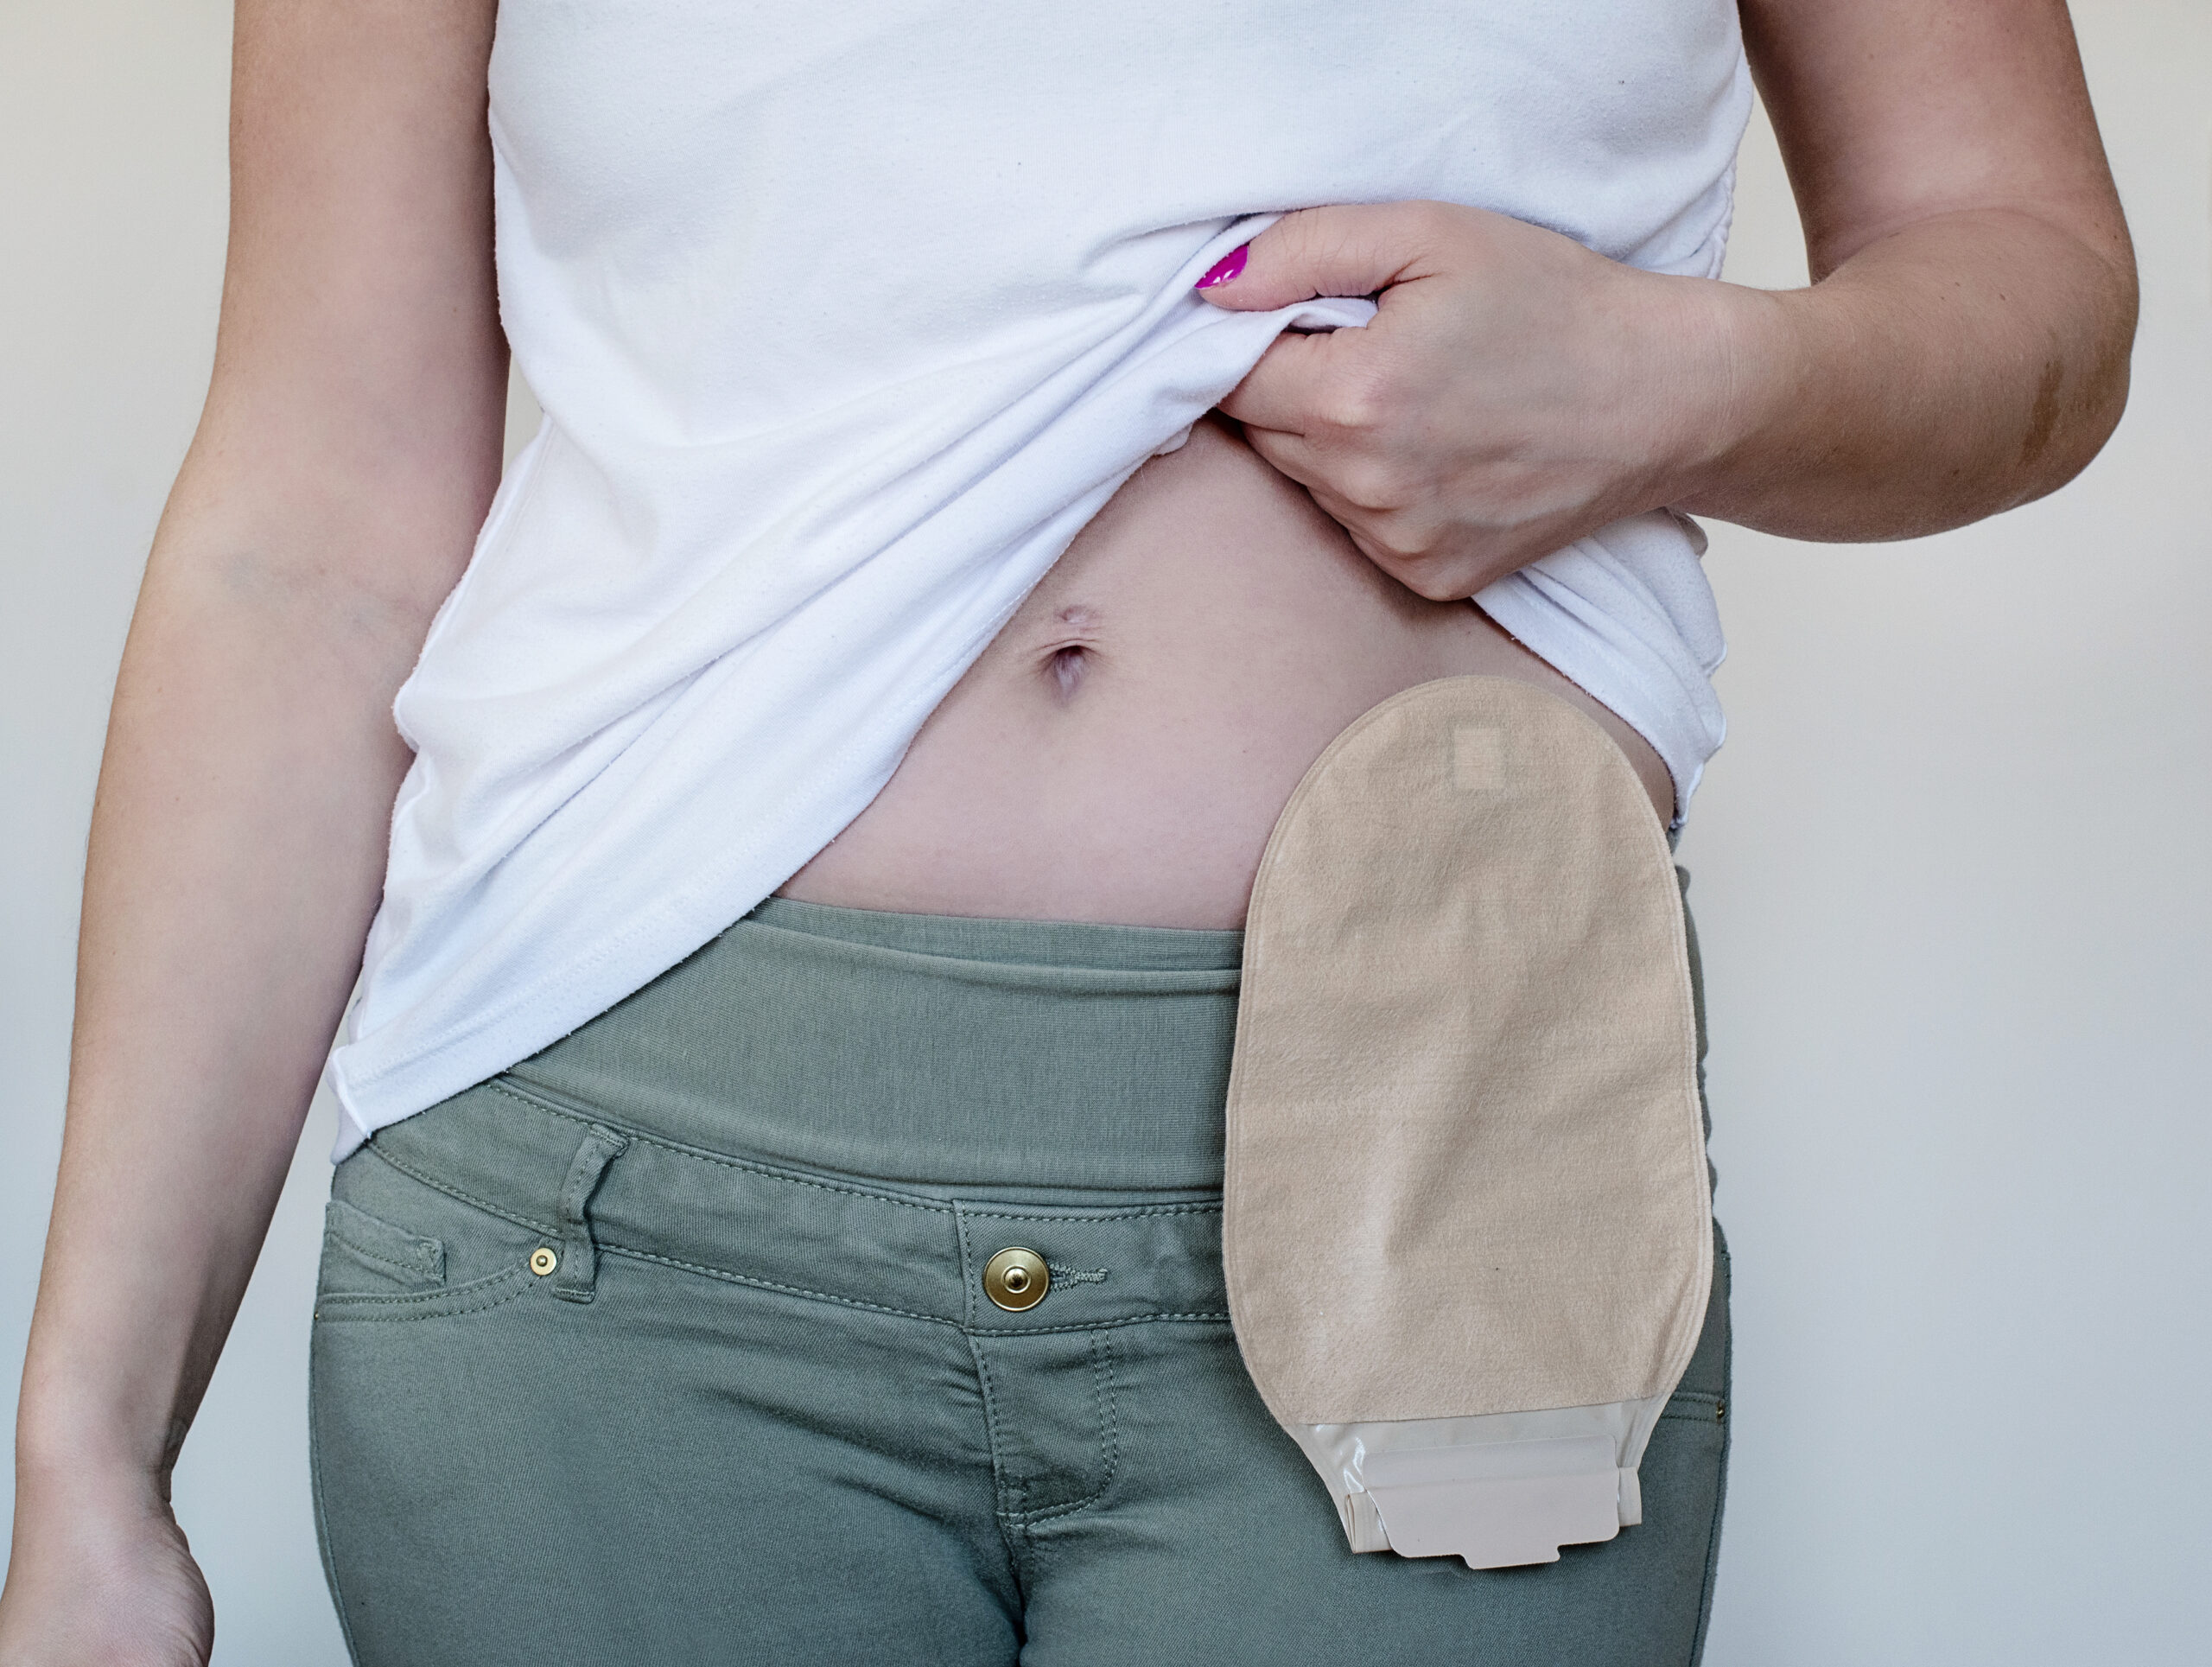 How To Prevent Pancaking In A Stoma Bag